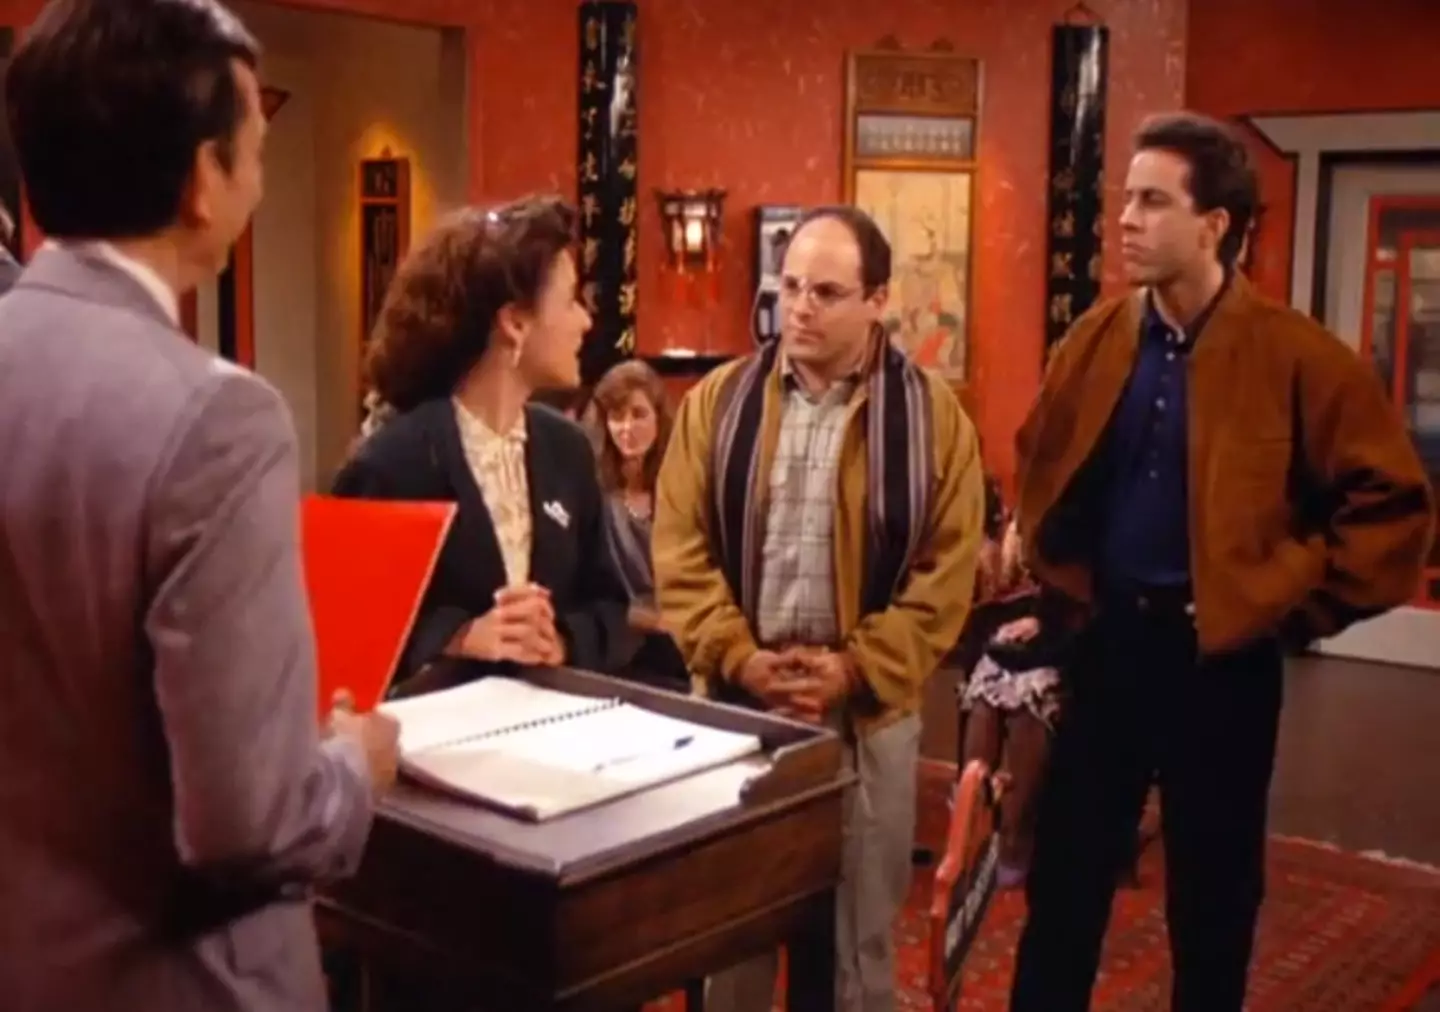 Jerry Seinfeld could have earned even more, if he'd agree to a new season.